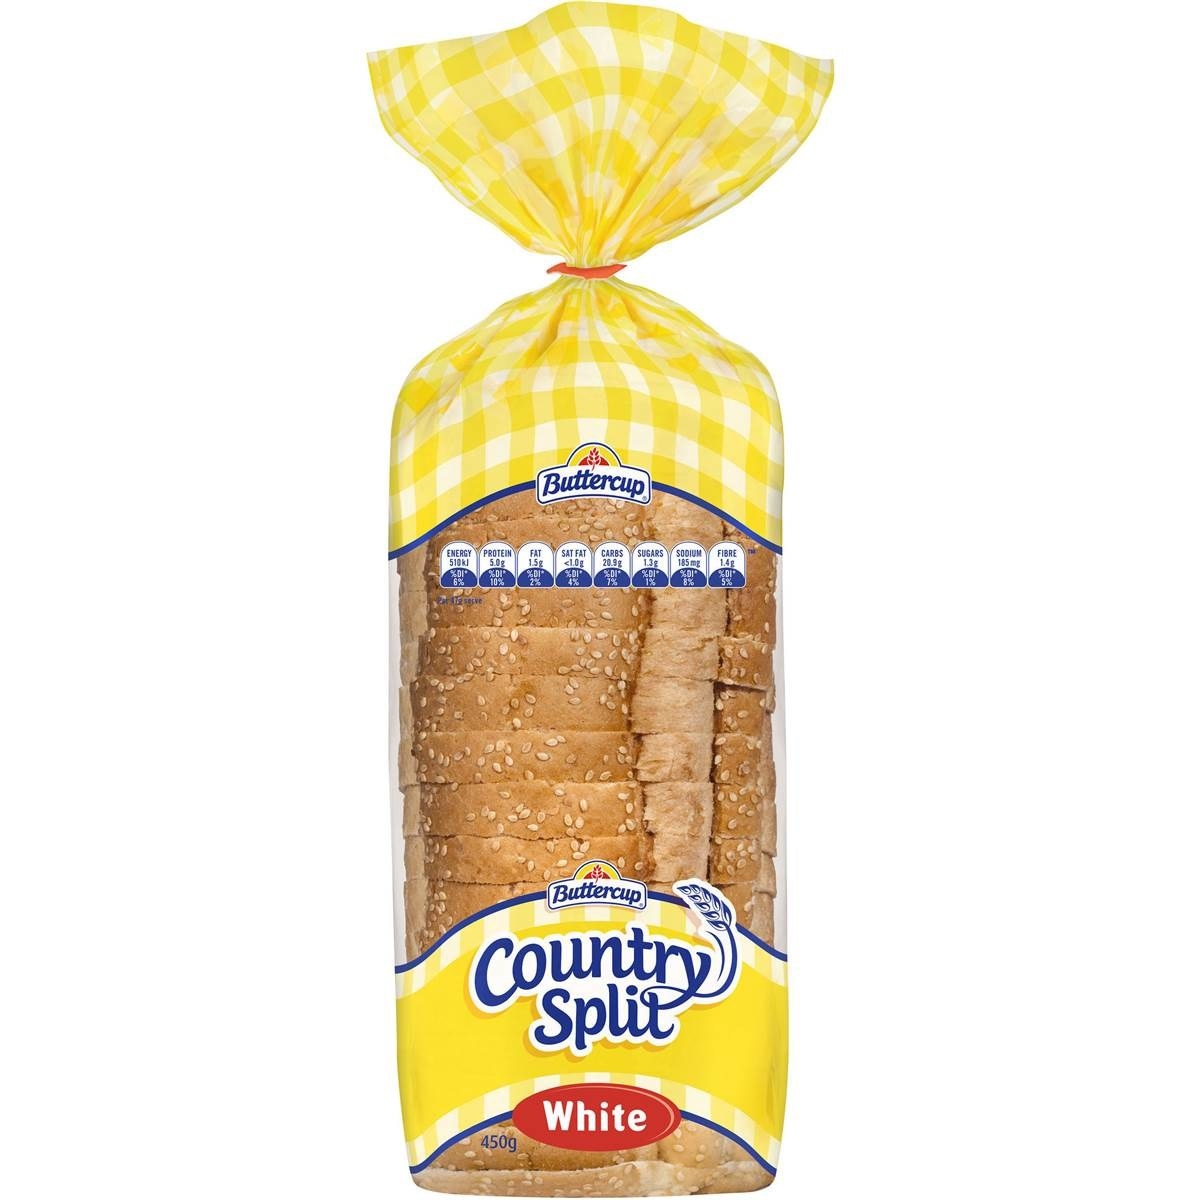 A loaf of Buttercup Country Split white bread